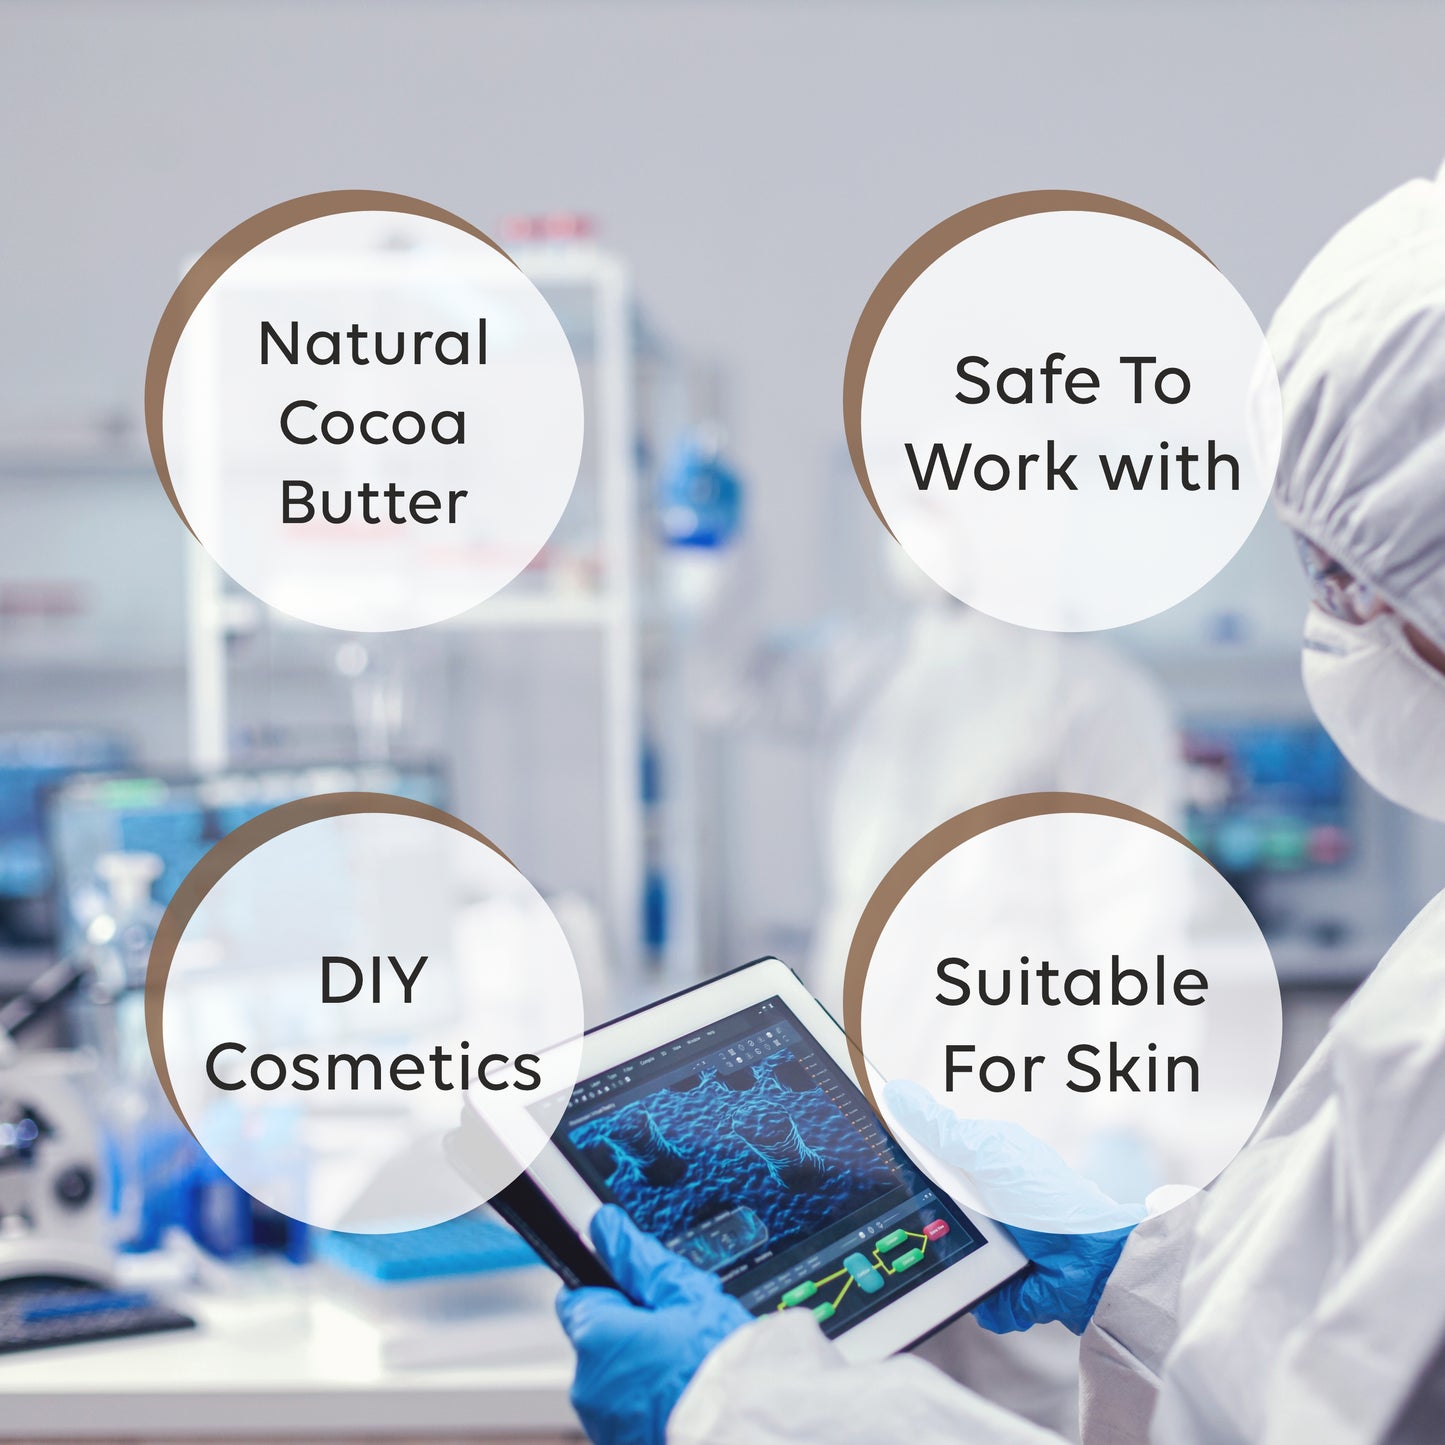 cosmeticmaking, saopmaking, cosmeticmakingingredients, soapmakingingredients,cosmeticingredients,naturalingredients,organicingredients,veganingredients, essentialoils,fragranceoils,carrieroils, carrieroils, butters, clays,botanicals,herbs,preservatives,emulsifiers,surfa ctants,thickeners, thickeners,exfoliants,butter, body butter, cocoa butter